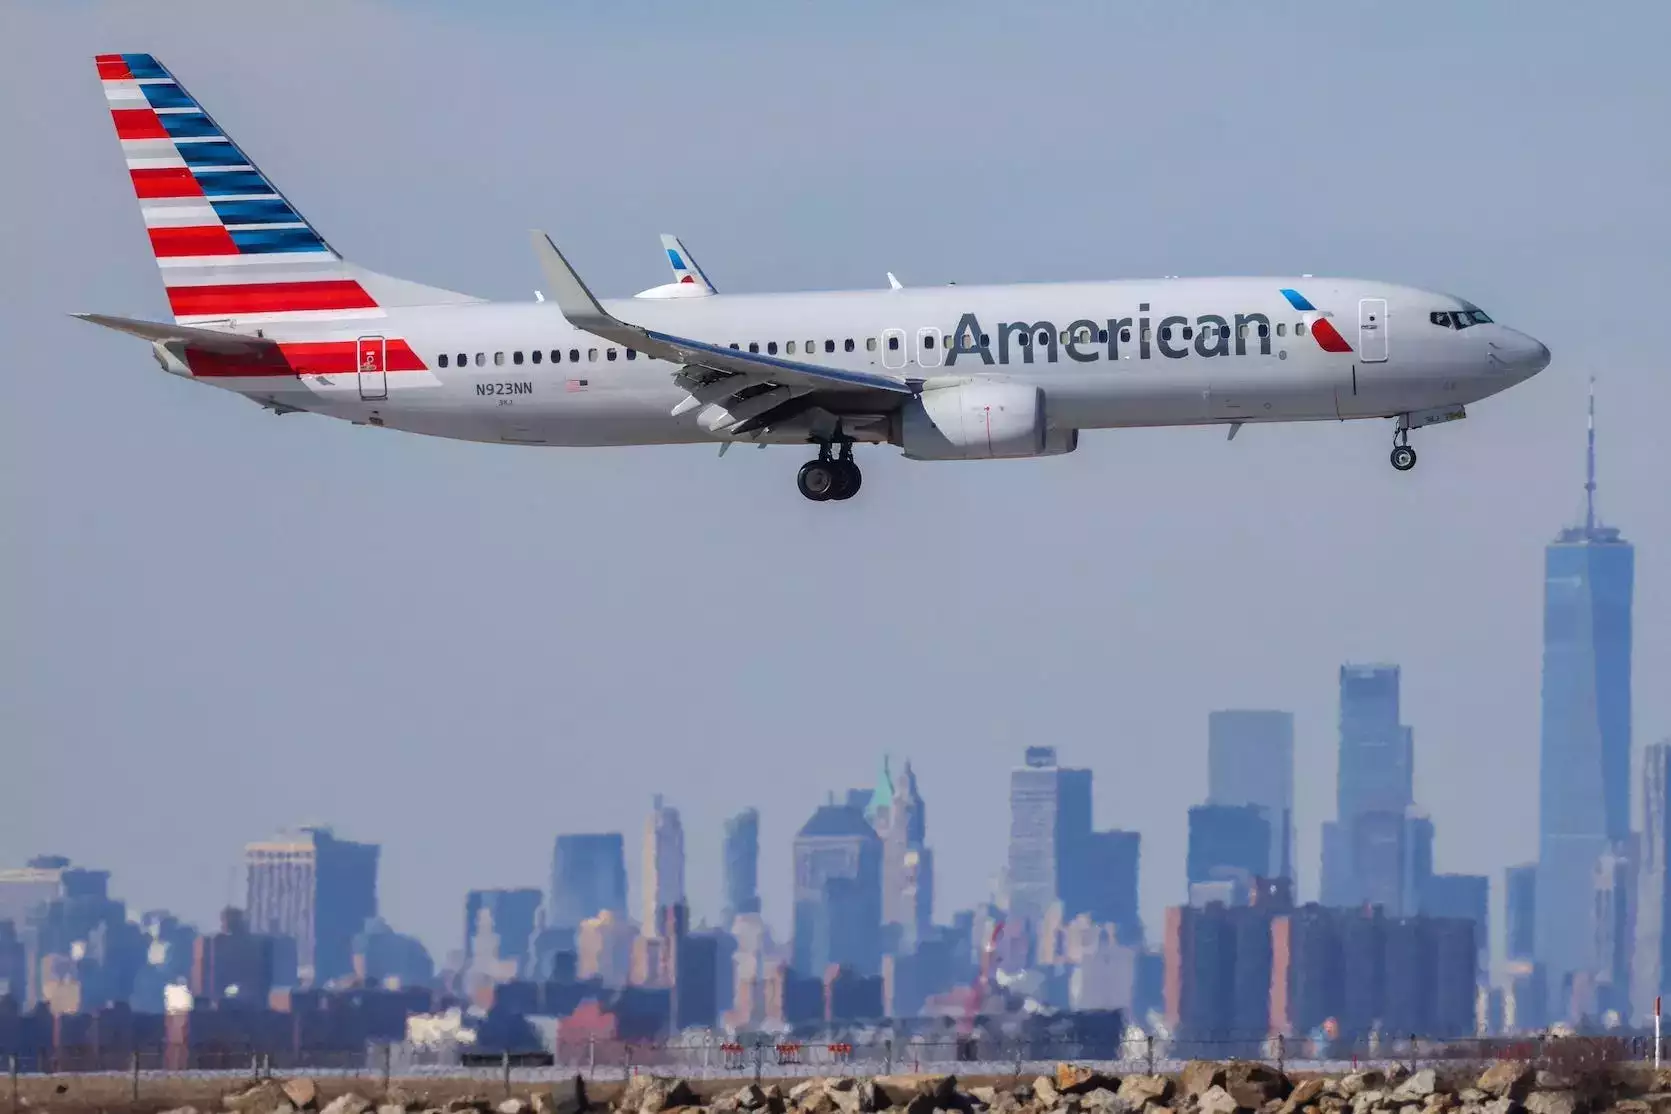 American Airlines Pilots Highlight Urgent Safety Woes Amid Increasing Air Travel Concerns